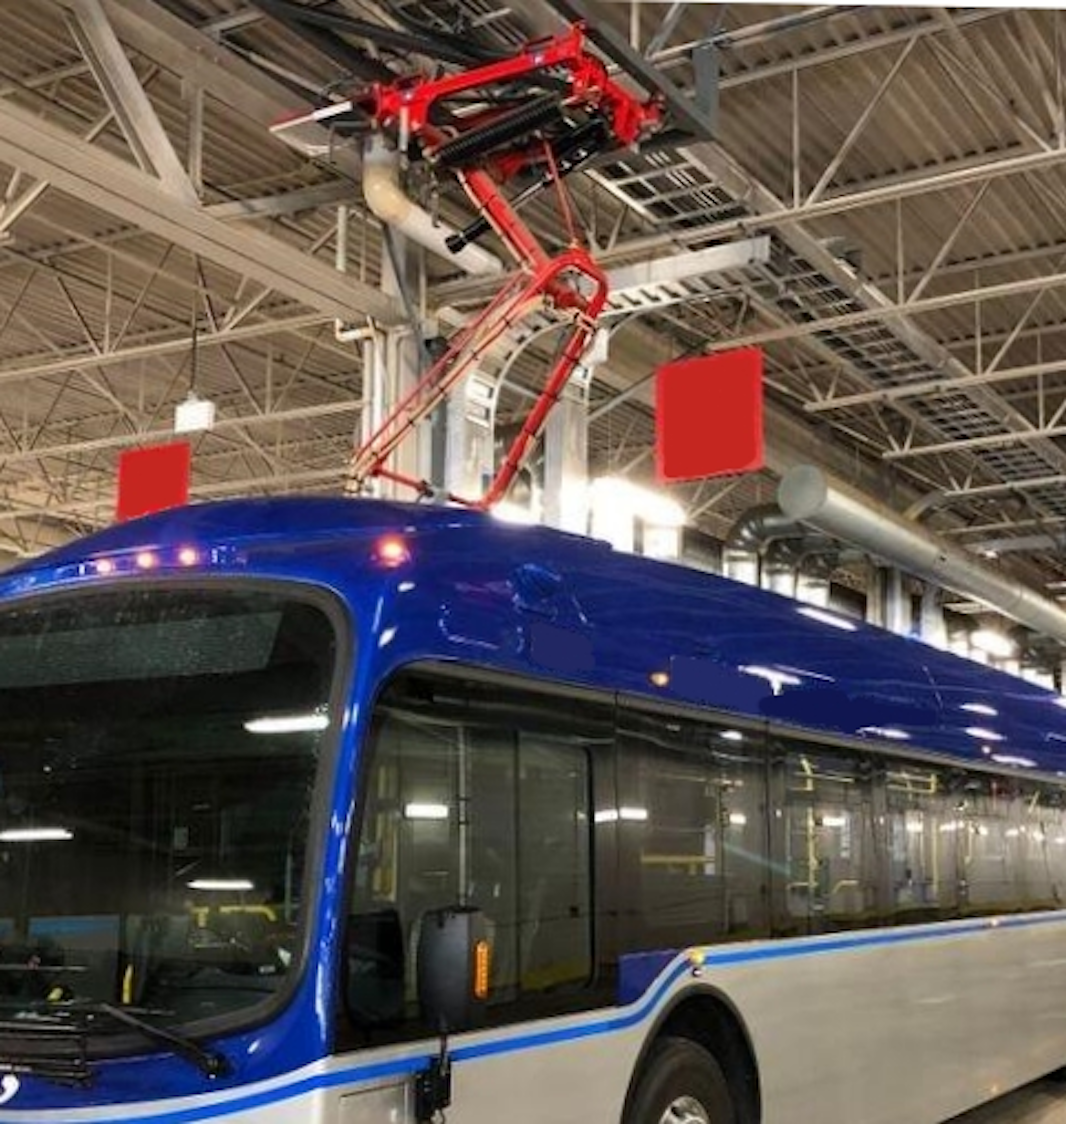 ETS installs in-depot pantographs to charge electric buses | Mass Transit